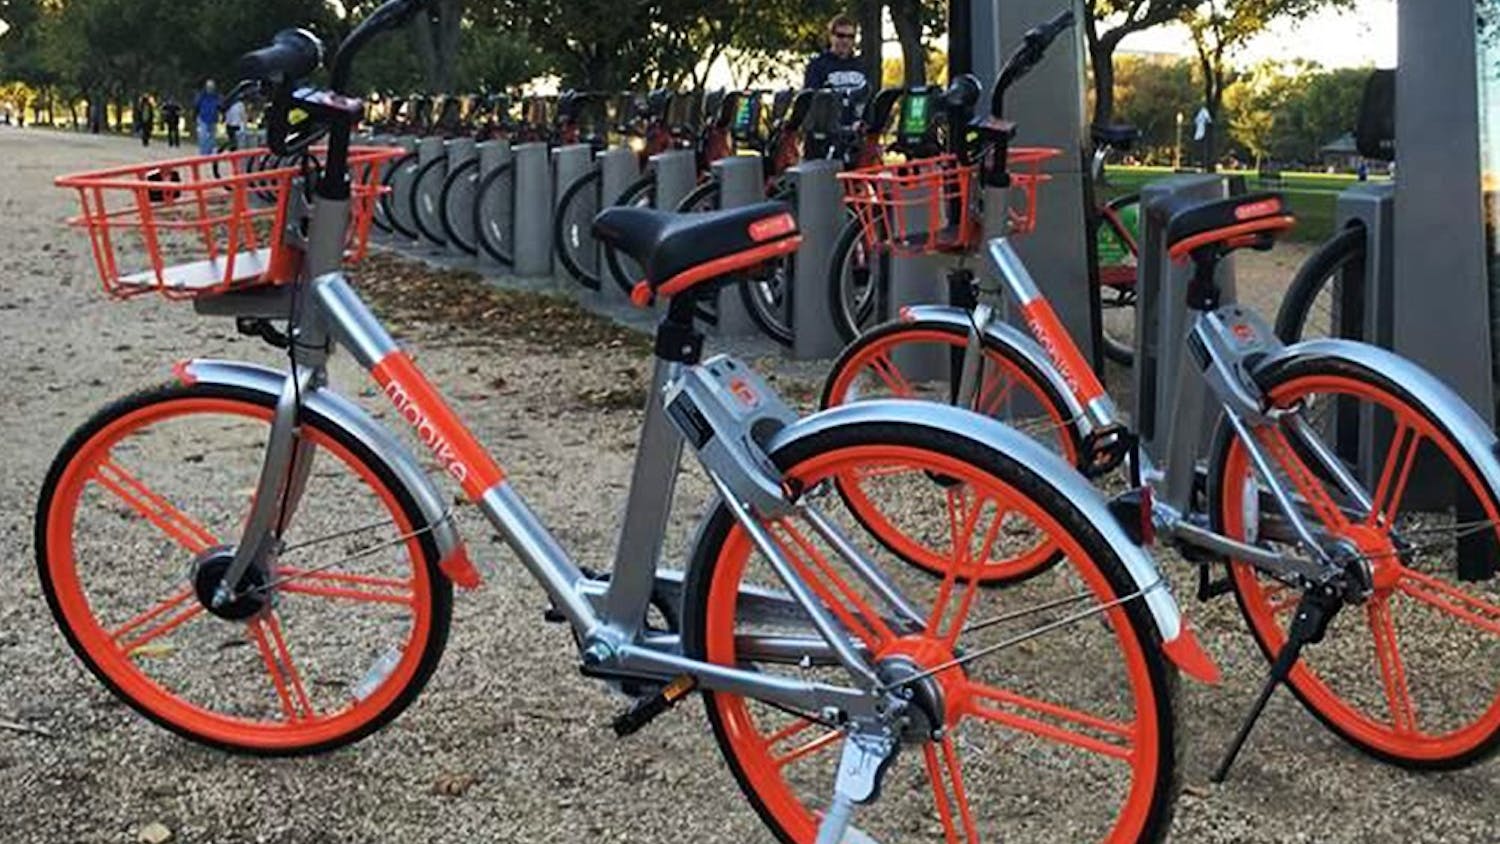 Dock-less bikes park next to a docking station for Capital Bikeshare, in Washington, D.C. Bloomington city officials will work with South Bend, the first city to implement a dock-less bikeshare program in Indiana, as it works to create a bikeshare program in Bloomington.